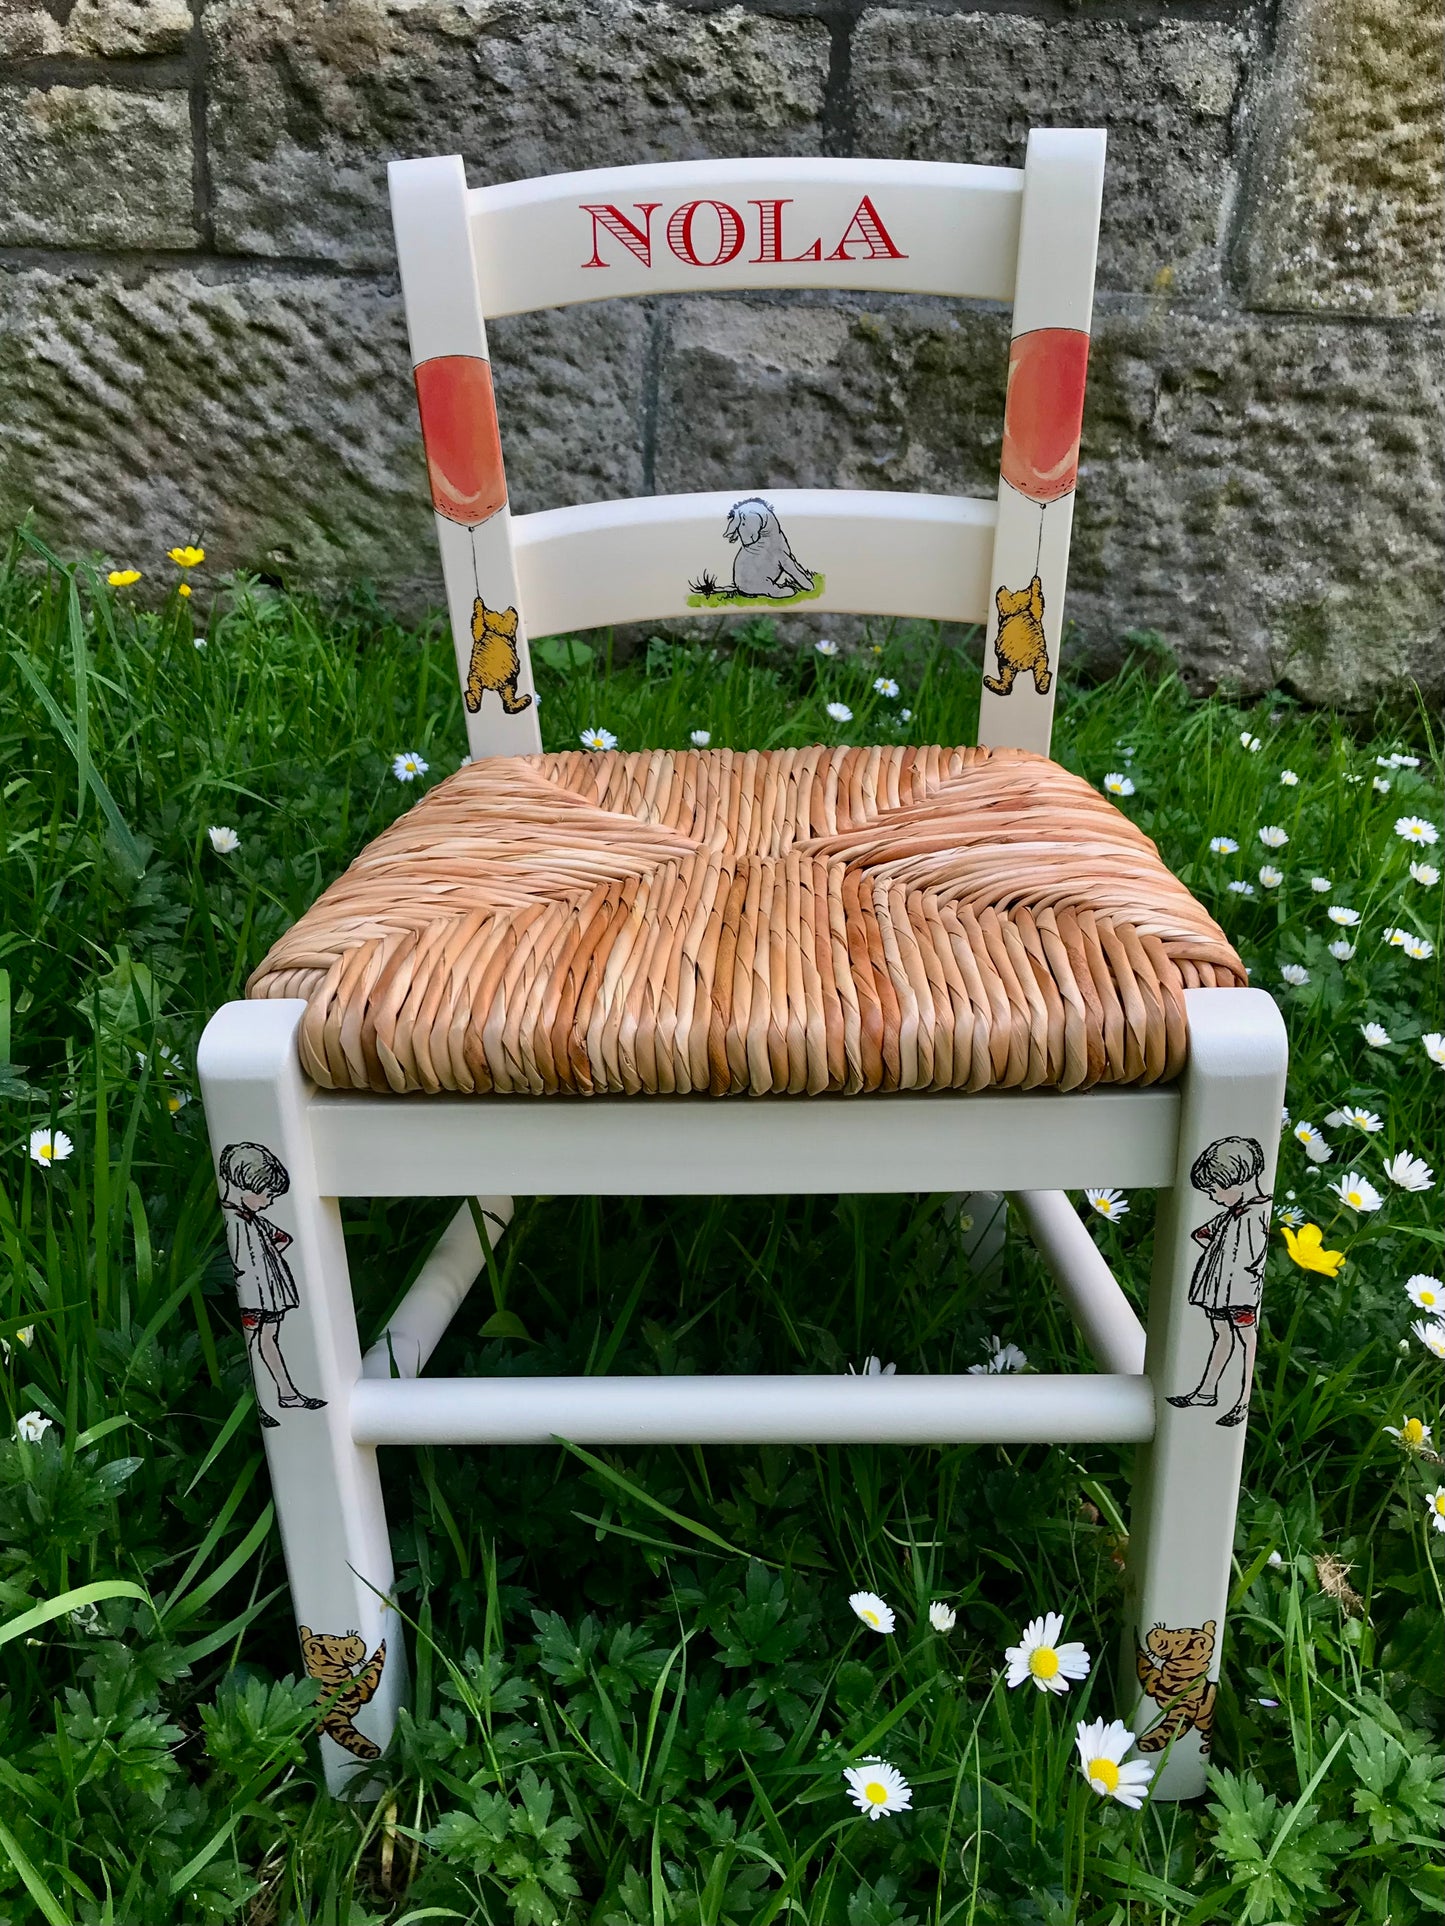 Rush seat personalised children's chair - Winnie The Pooh theme - made to order